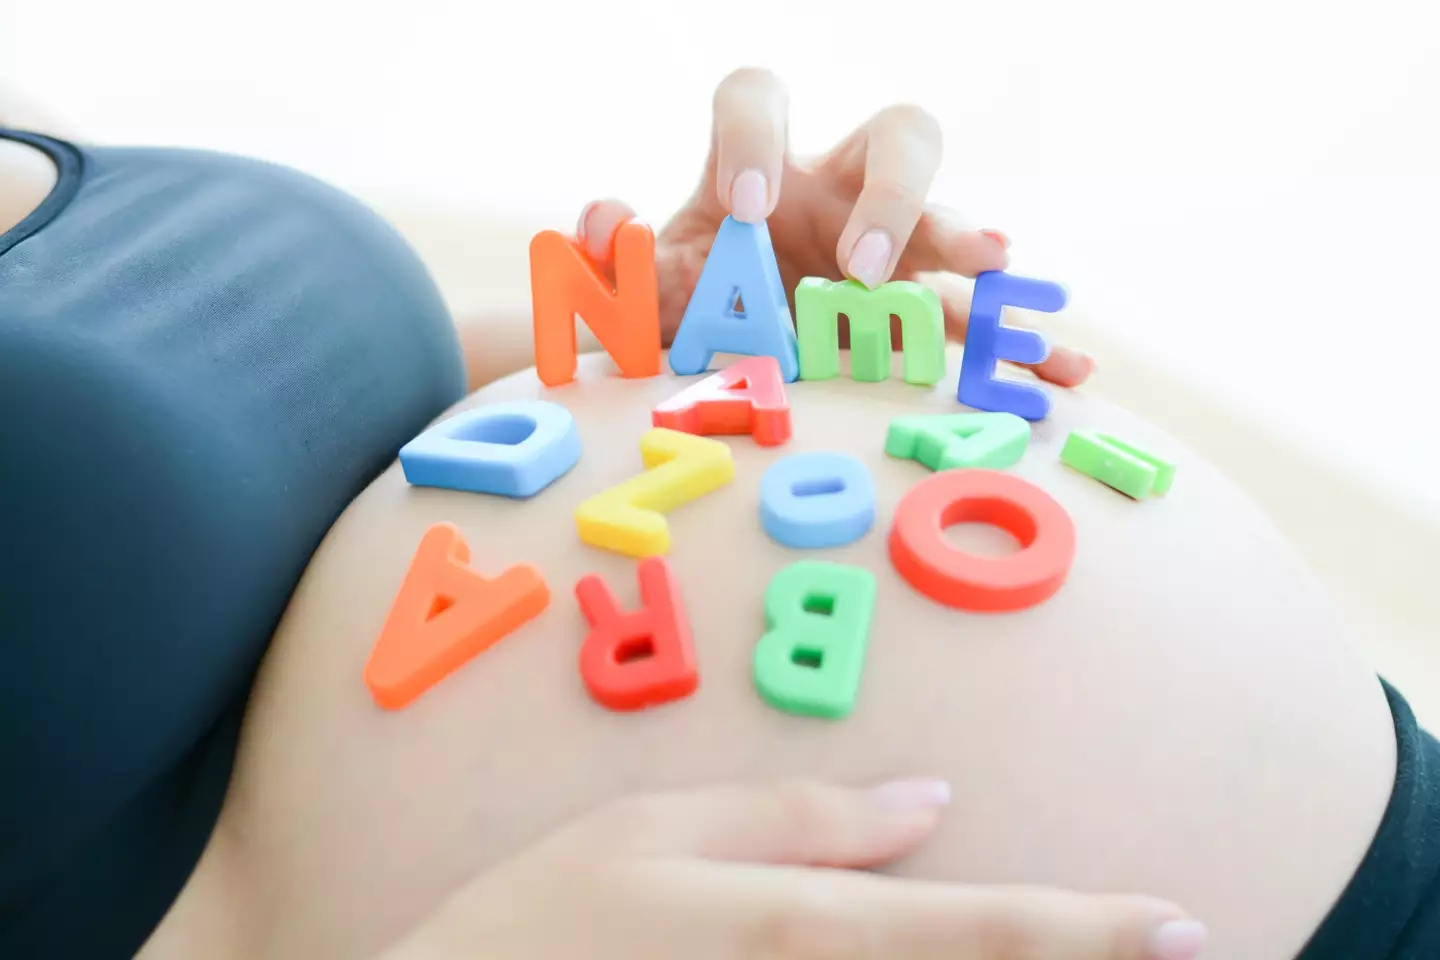 Choosing a baby name is an important decision.